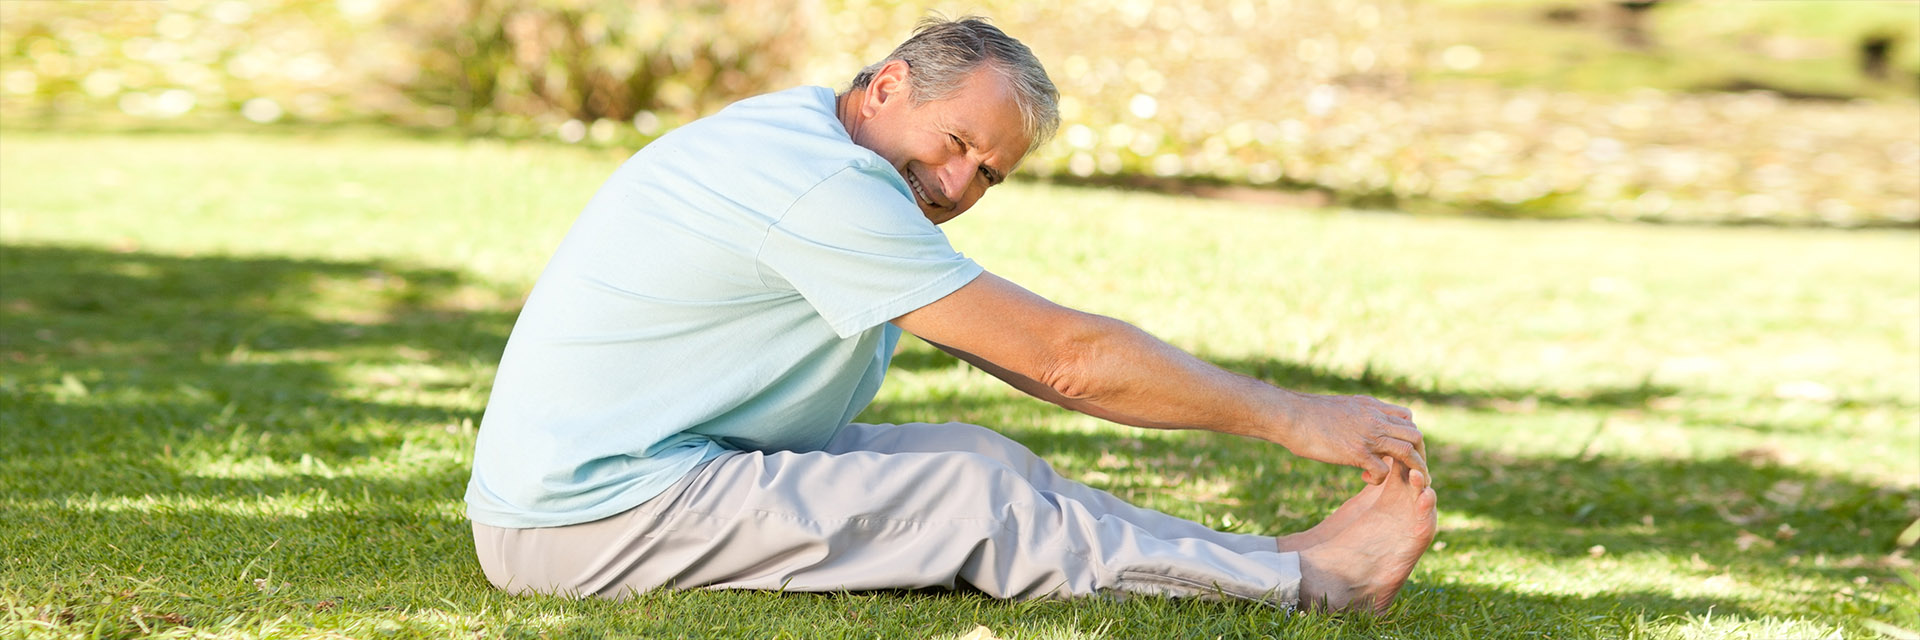 Mature man sitting on grass in park touching toes, practicing Yoga